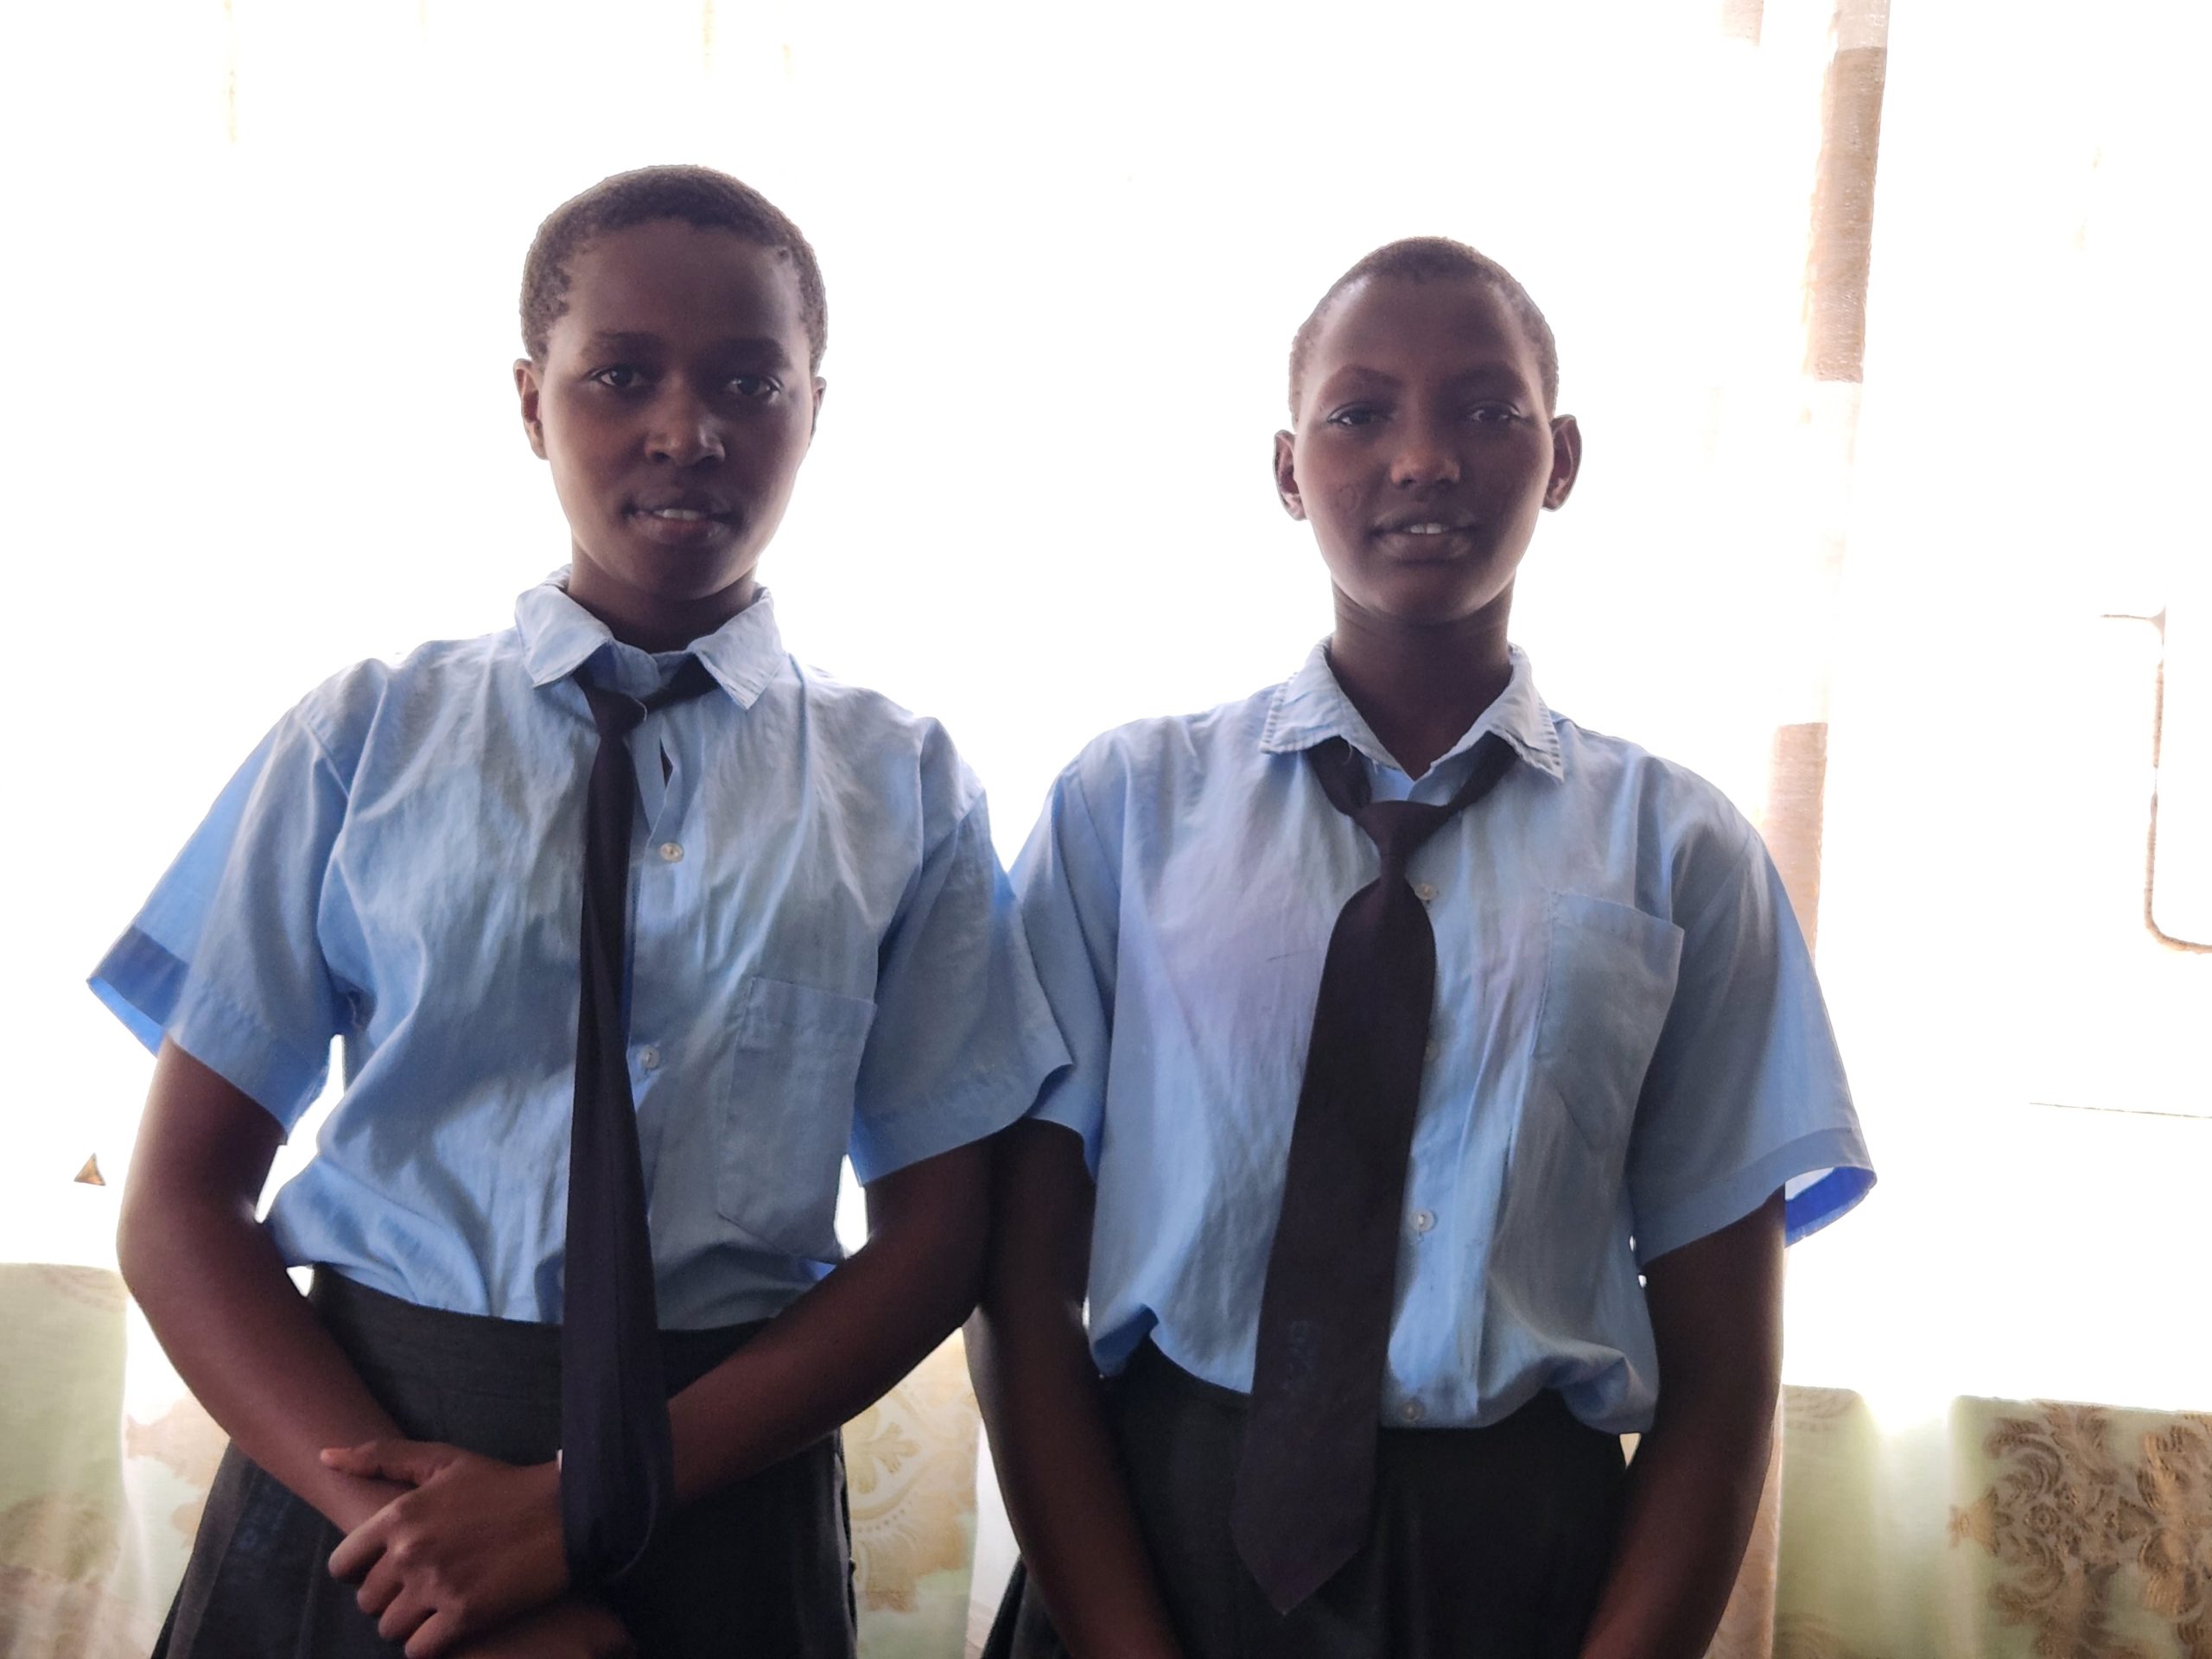 Sarah and Winnie, who Born Free are supporting, in their school uniforms.